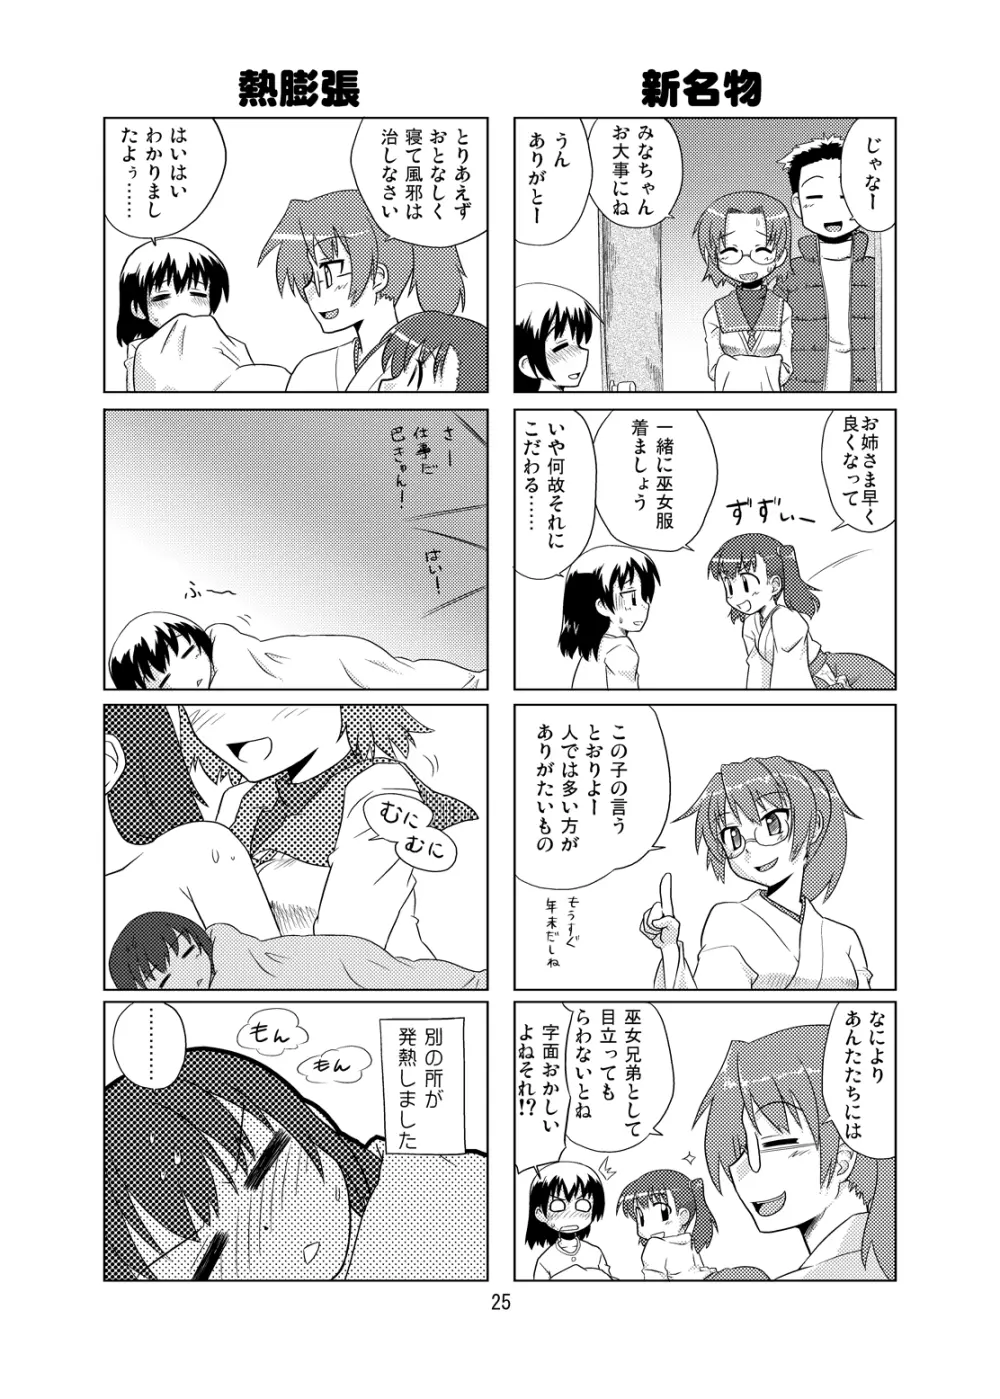 Composition Mix 8 はじマル！6 Page.24